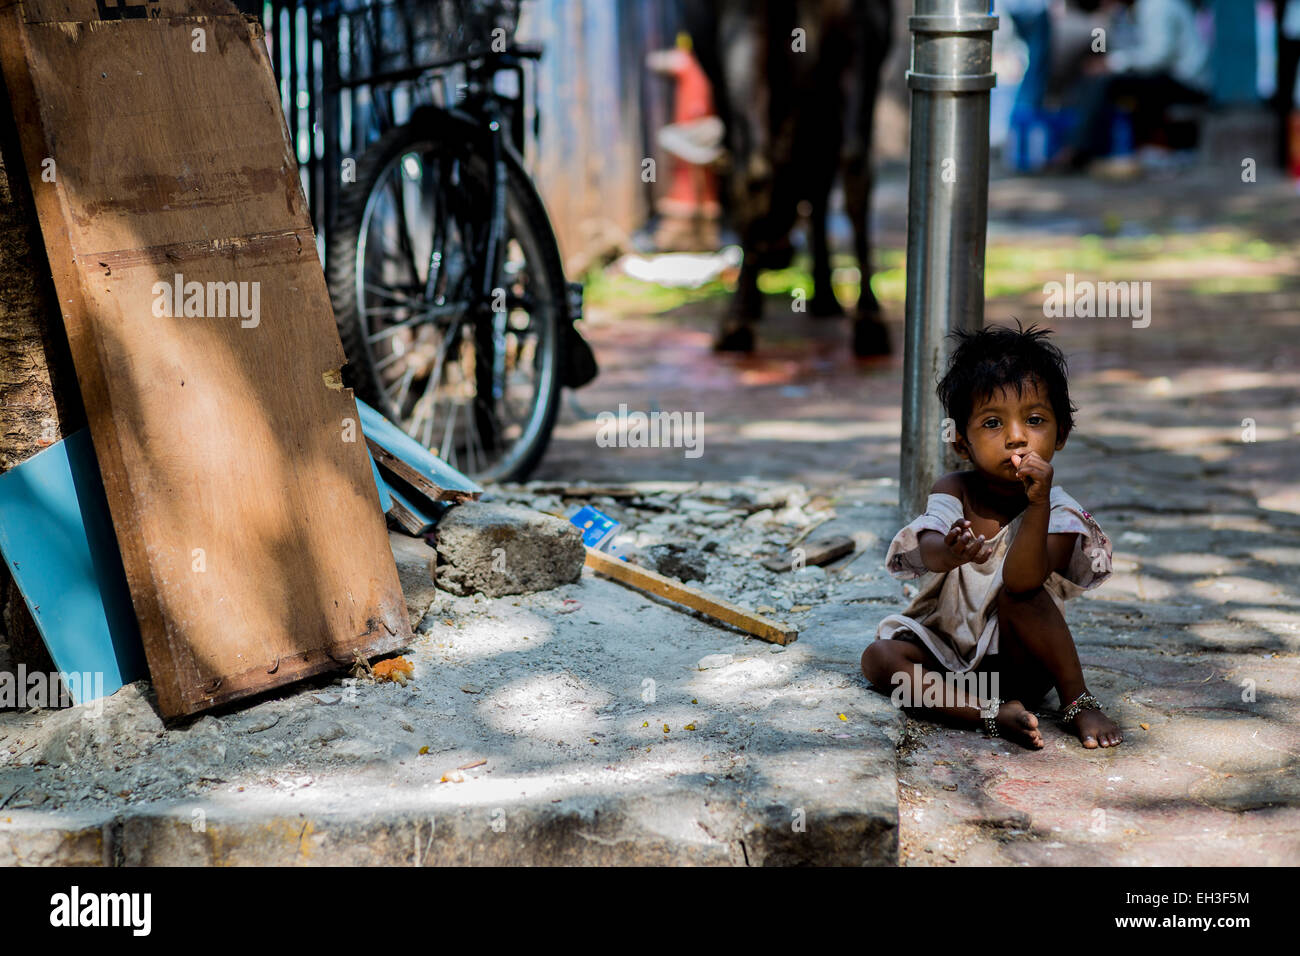 A small homeless street child is sitting by the roadside looking in to the camera with her hand out. Stock Photo